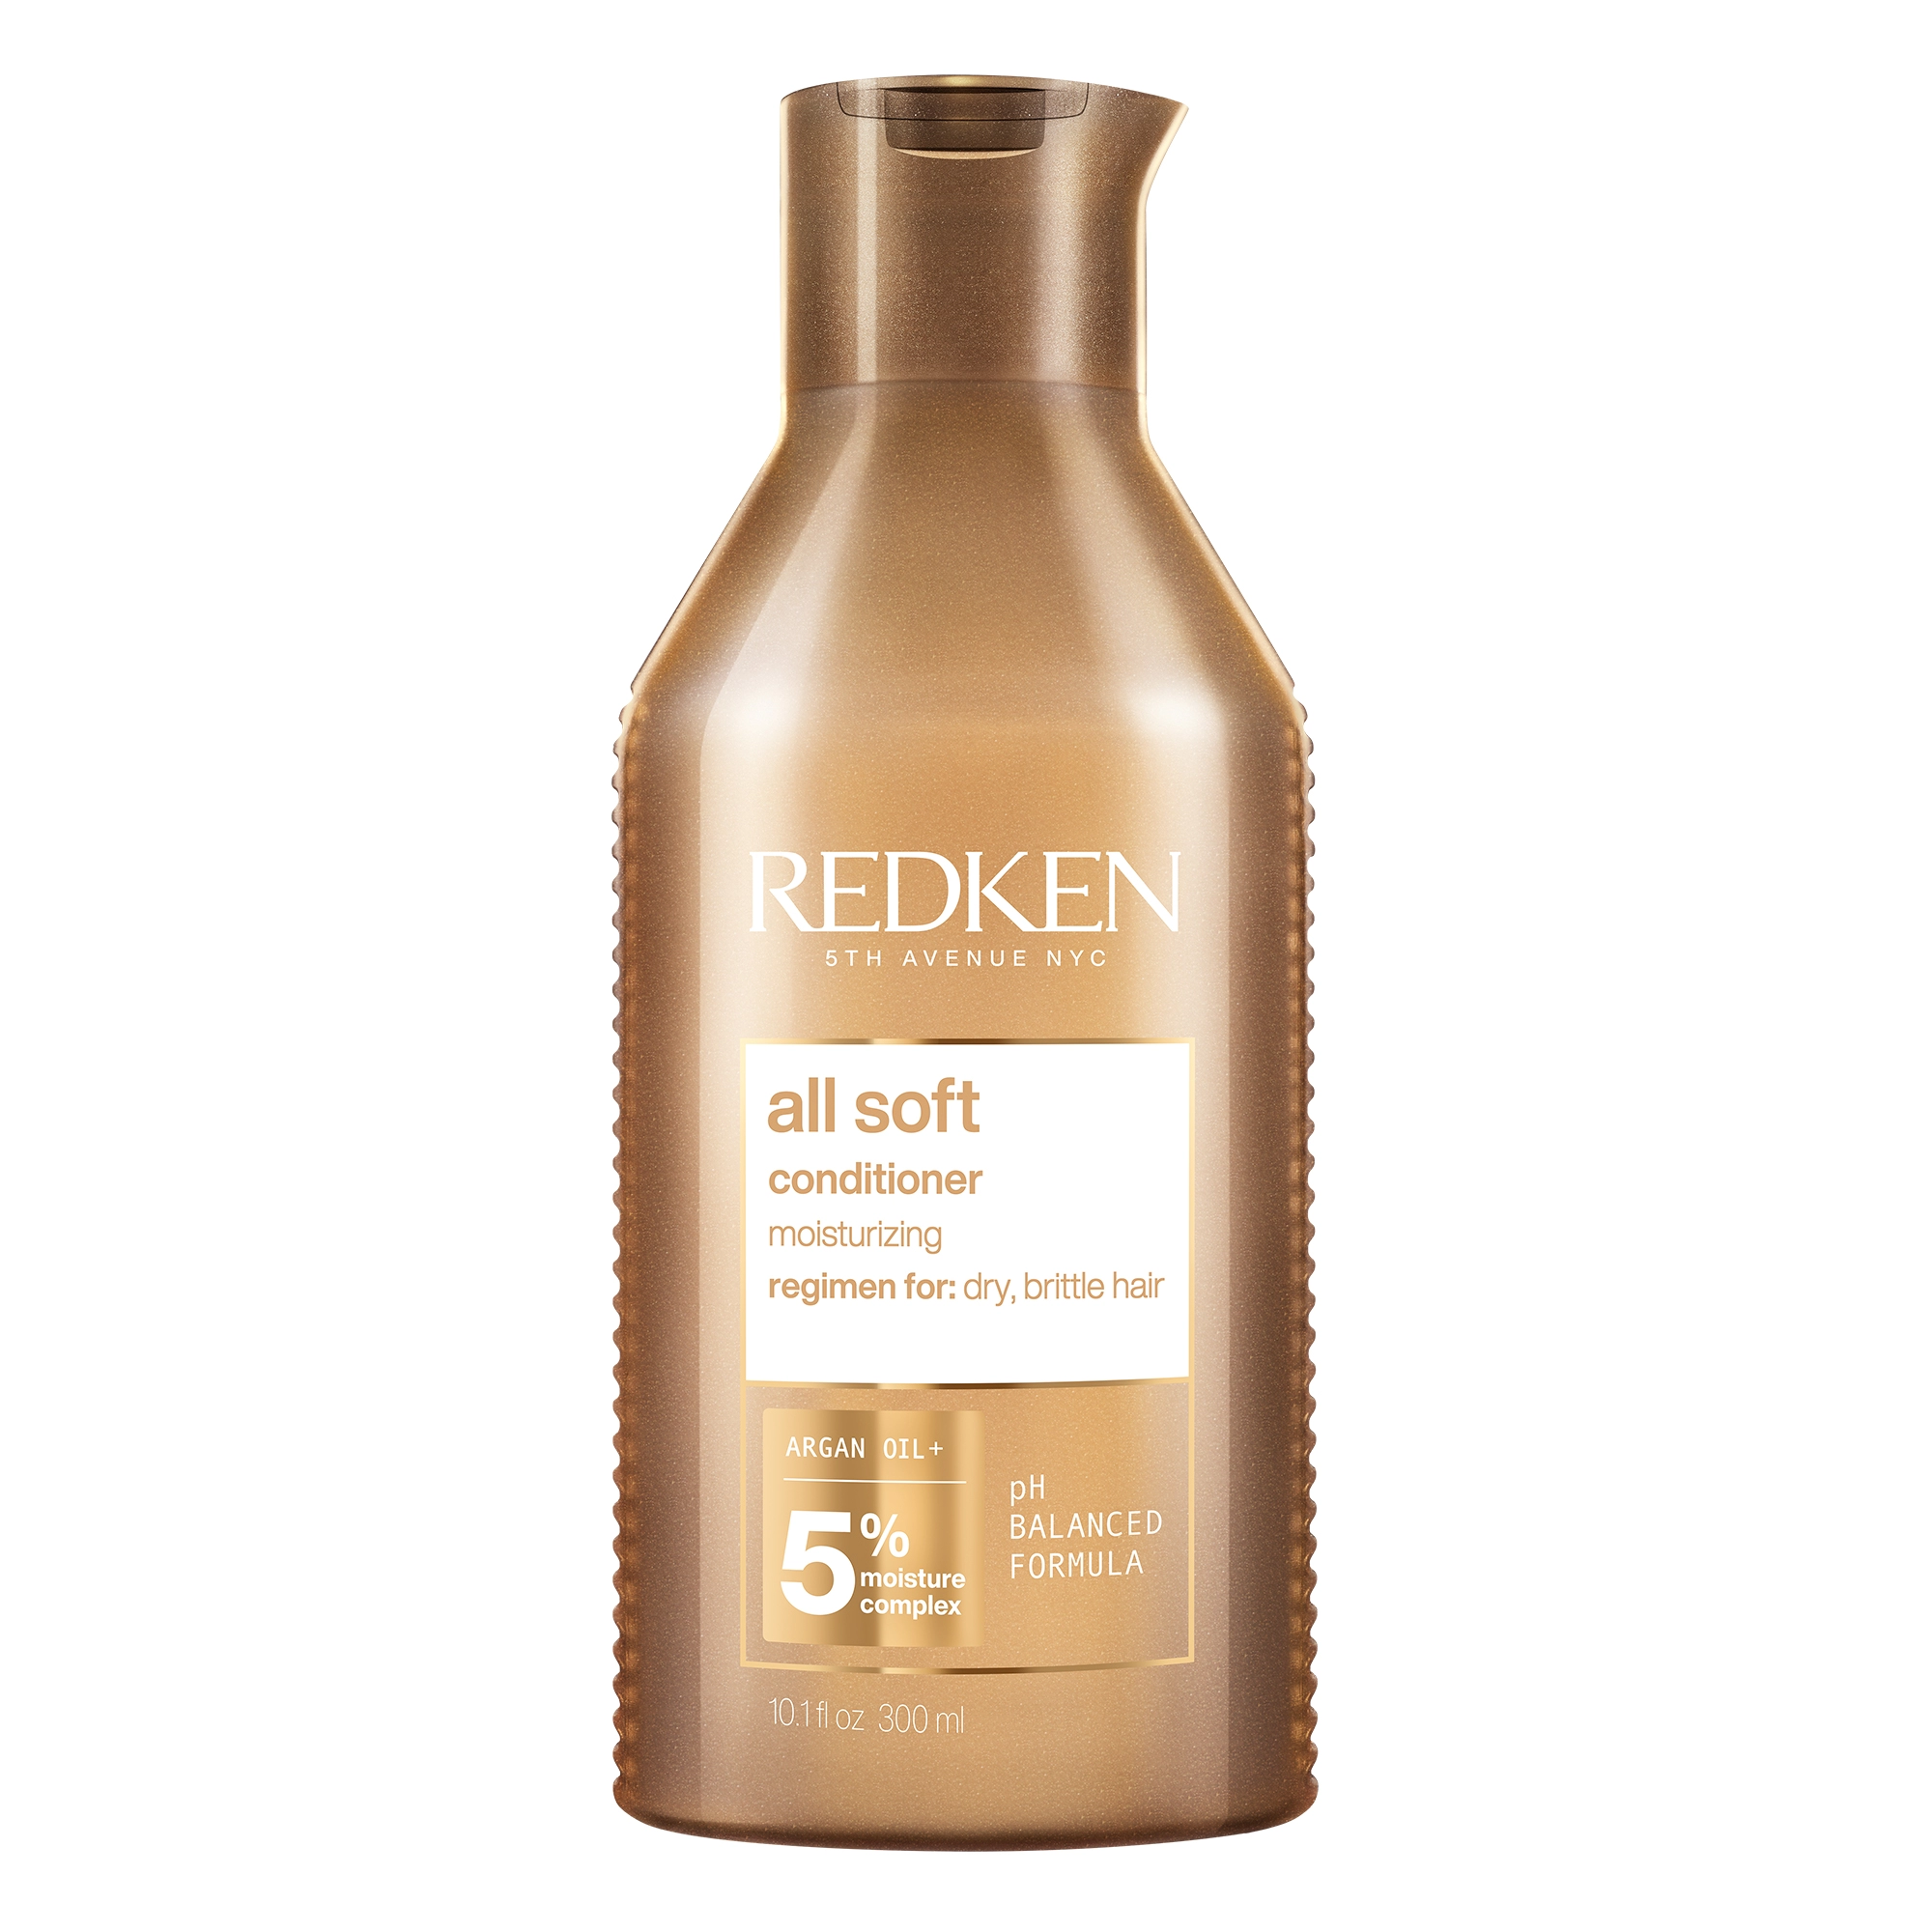 Redken-2020-All-Soft-Conditioner-Product-Shot-2000×2000